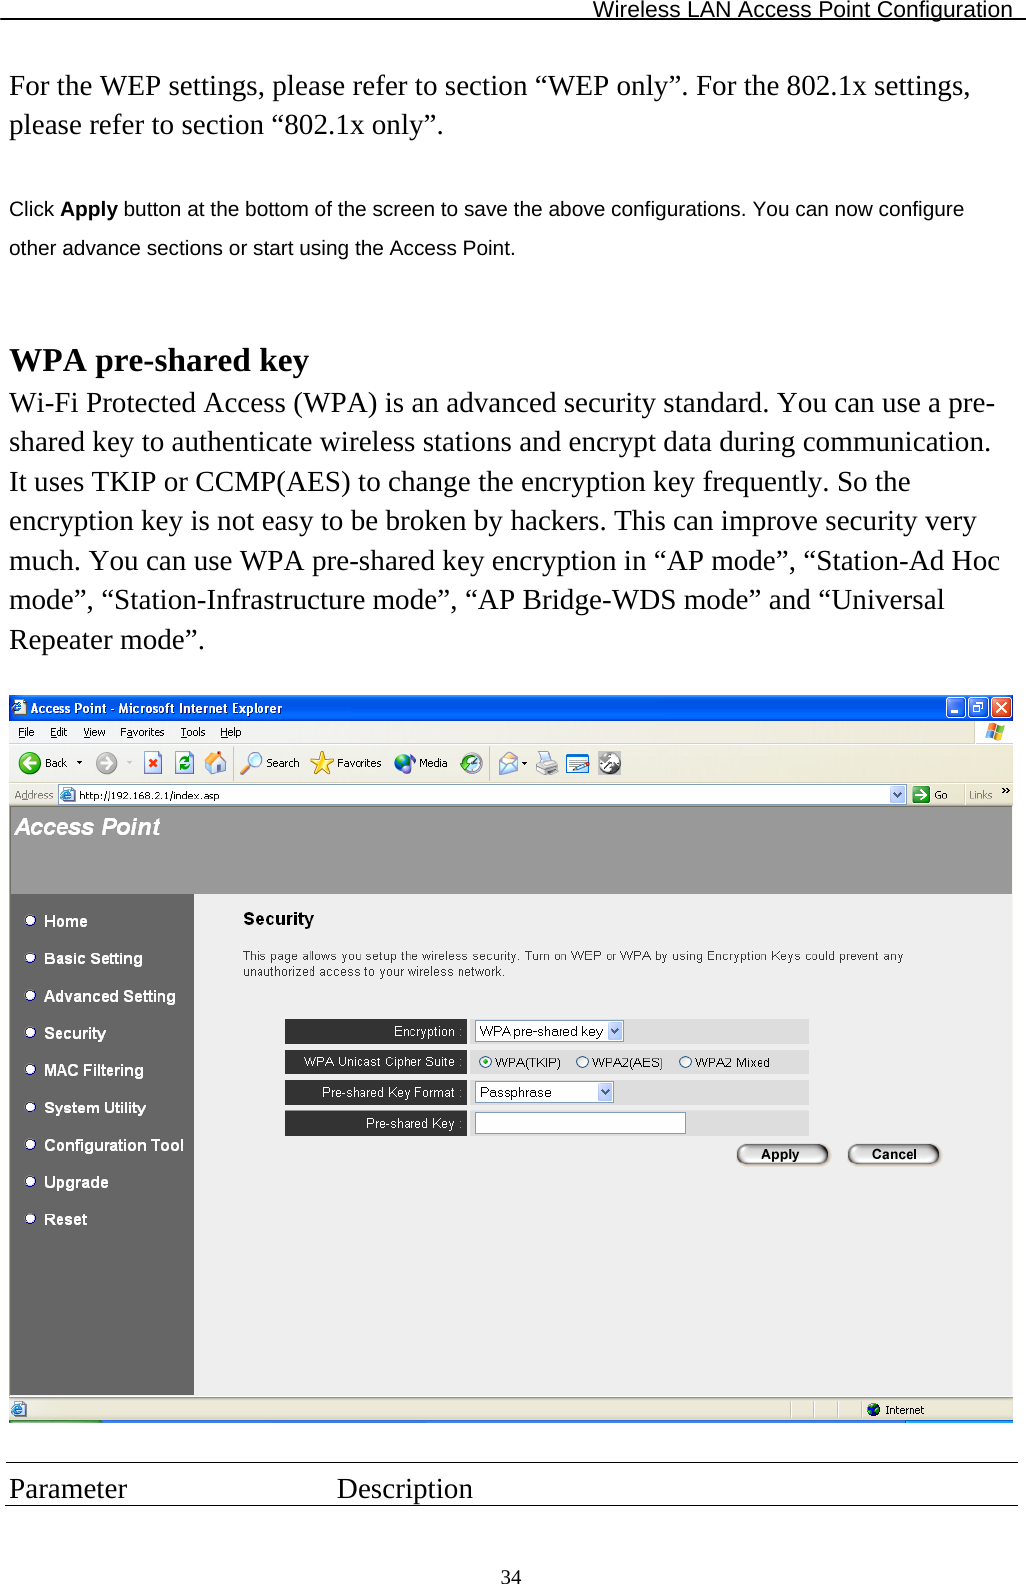 Wireless LAN Access Point Configuration  34For the WEP settings, please refer to section “WEP only”. For the 802.1x settings, please refer to section “802.1x only”.  Click Apply button at the bottom of the screen to save the above configurations. You can now configure other advance sections or start using the Access Point.   WPA pre-shared key Wi-Fi Protected Access (WPA) is an advanced security standard. You can use a pre-shared key to authenticate wireless stations and encrypt data during communication. It uses TKIP or CCMP(AES) to change the encryption key frequently. So the encryption key is not easy to be broken by hackers. This can improve security very much. You can use WPA pre-shared key encryption in “AP mode”, “Station-Ad Hoc mode”, “Station-Infrastructure mode”, “AP Bridge-WDS mode” and “Universal Repeater mode”.    Parameter Description 